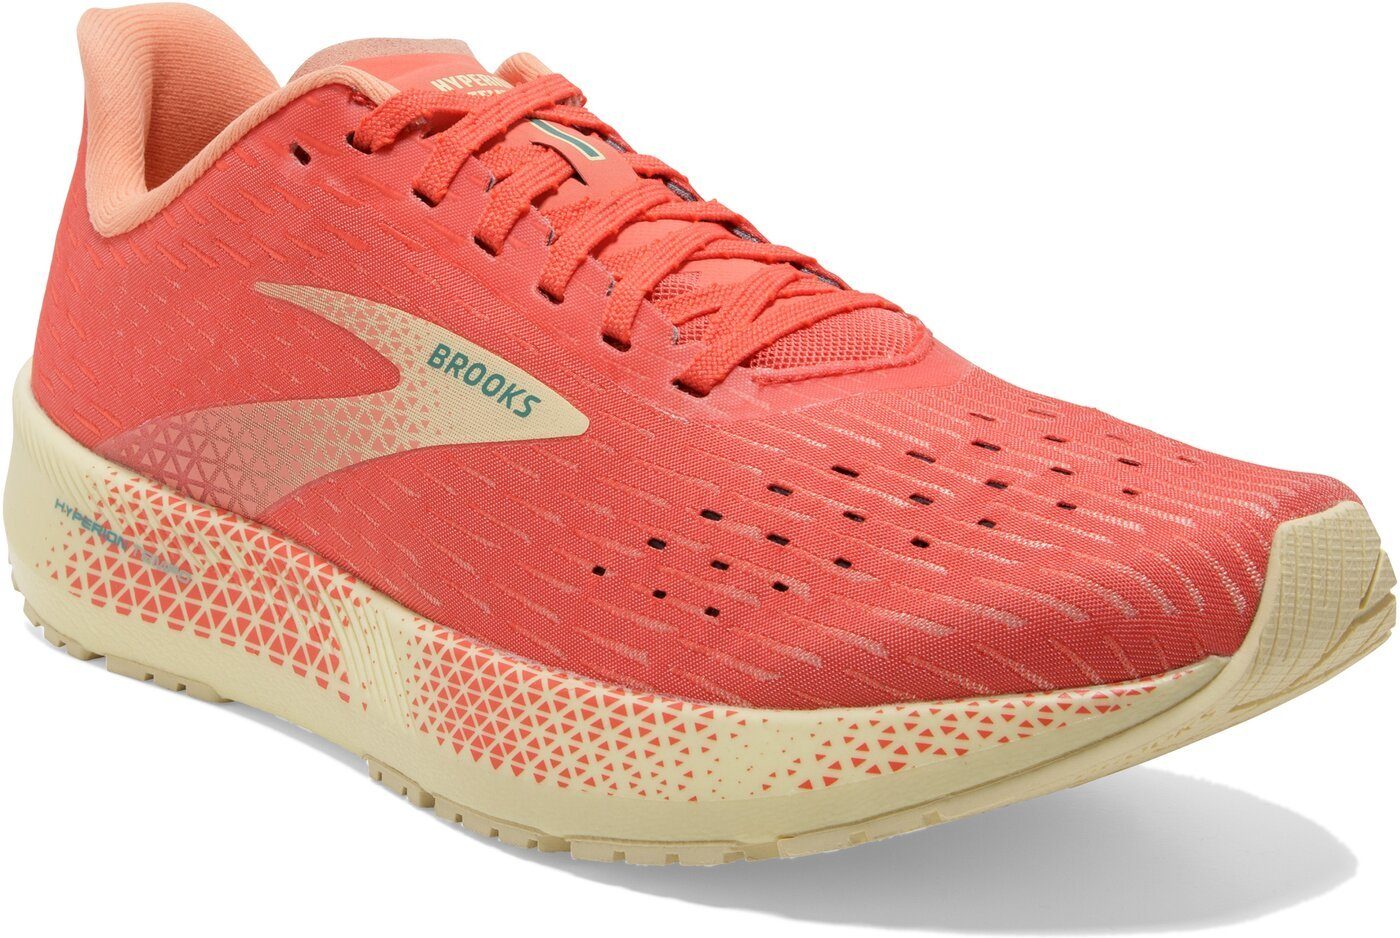 Brooks Hyperion Tempo HOT CORAL/FLAN/FUSION CORAL Laufschuh